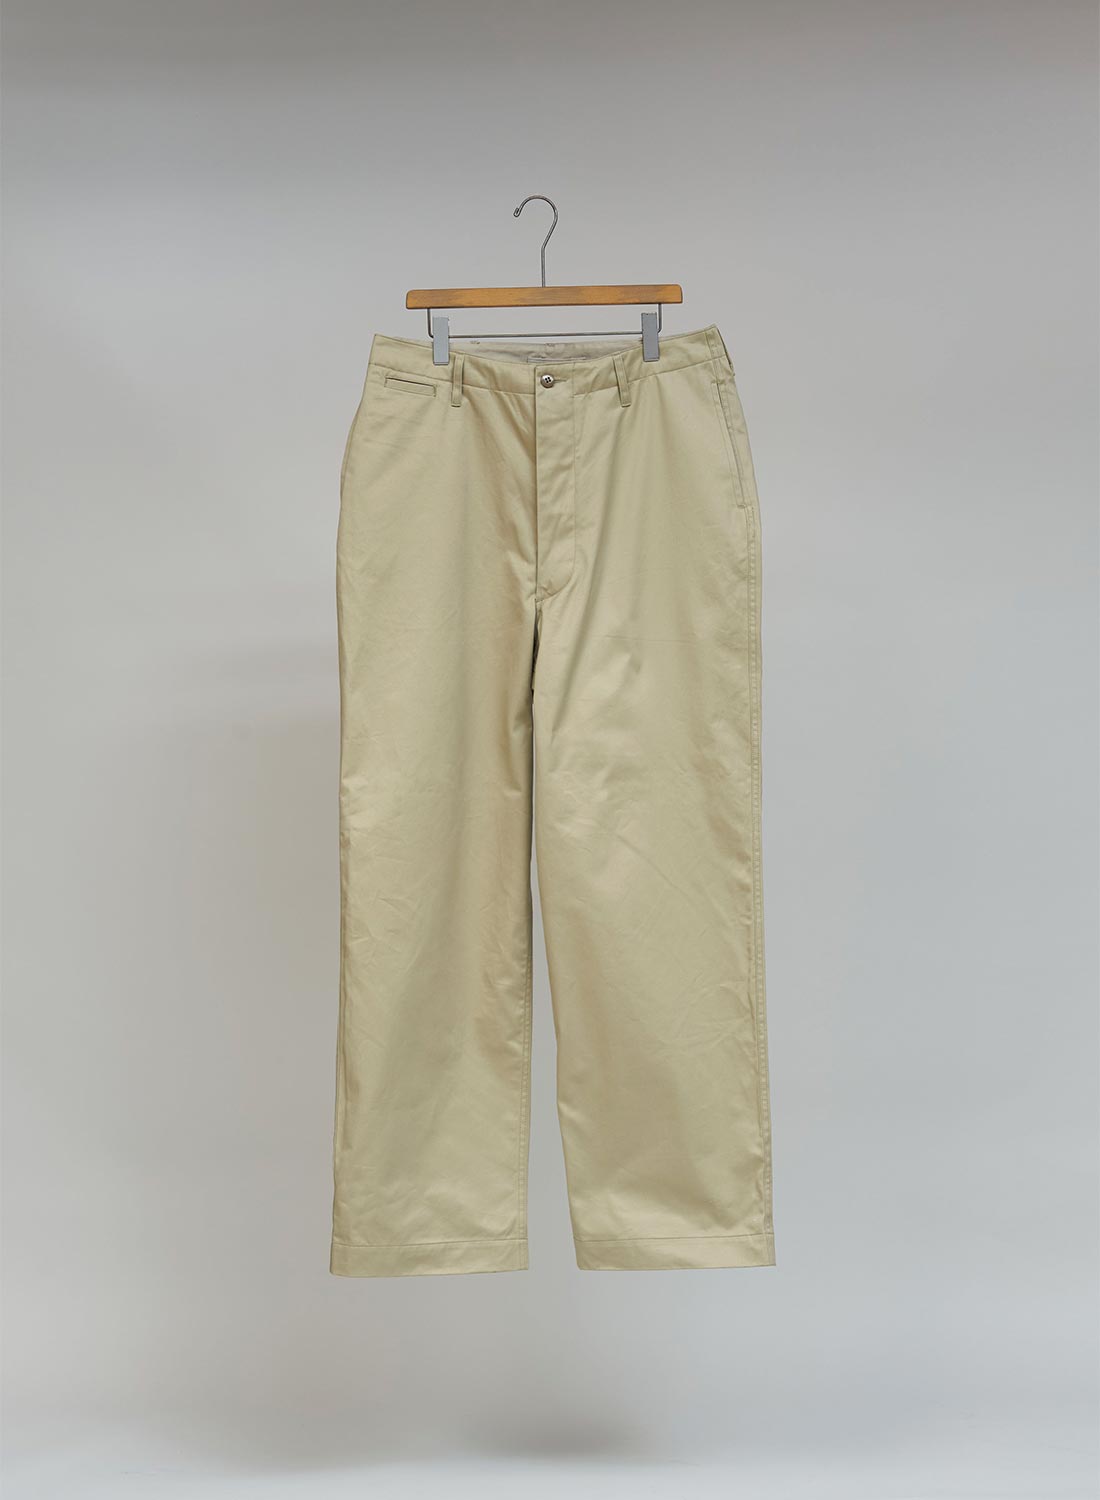 New Basic Chino Pant in Light Beige